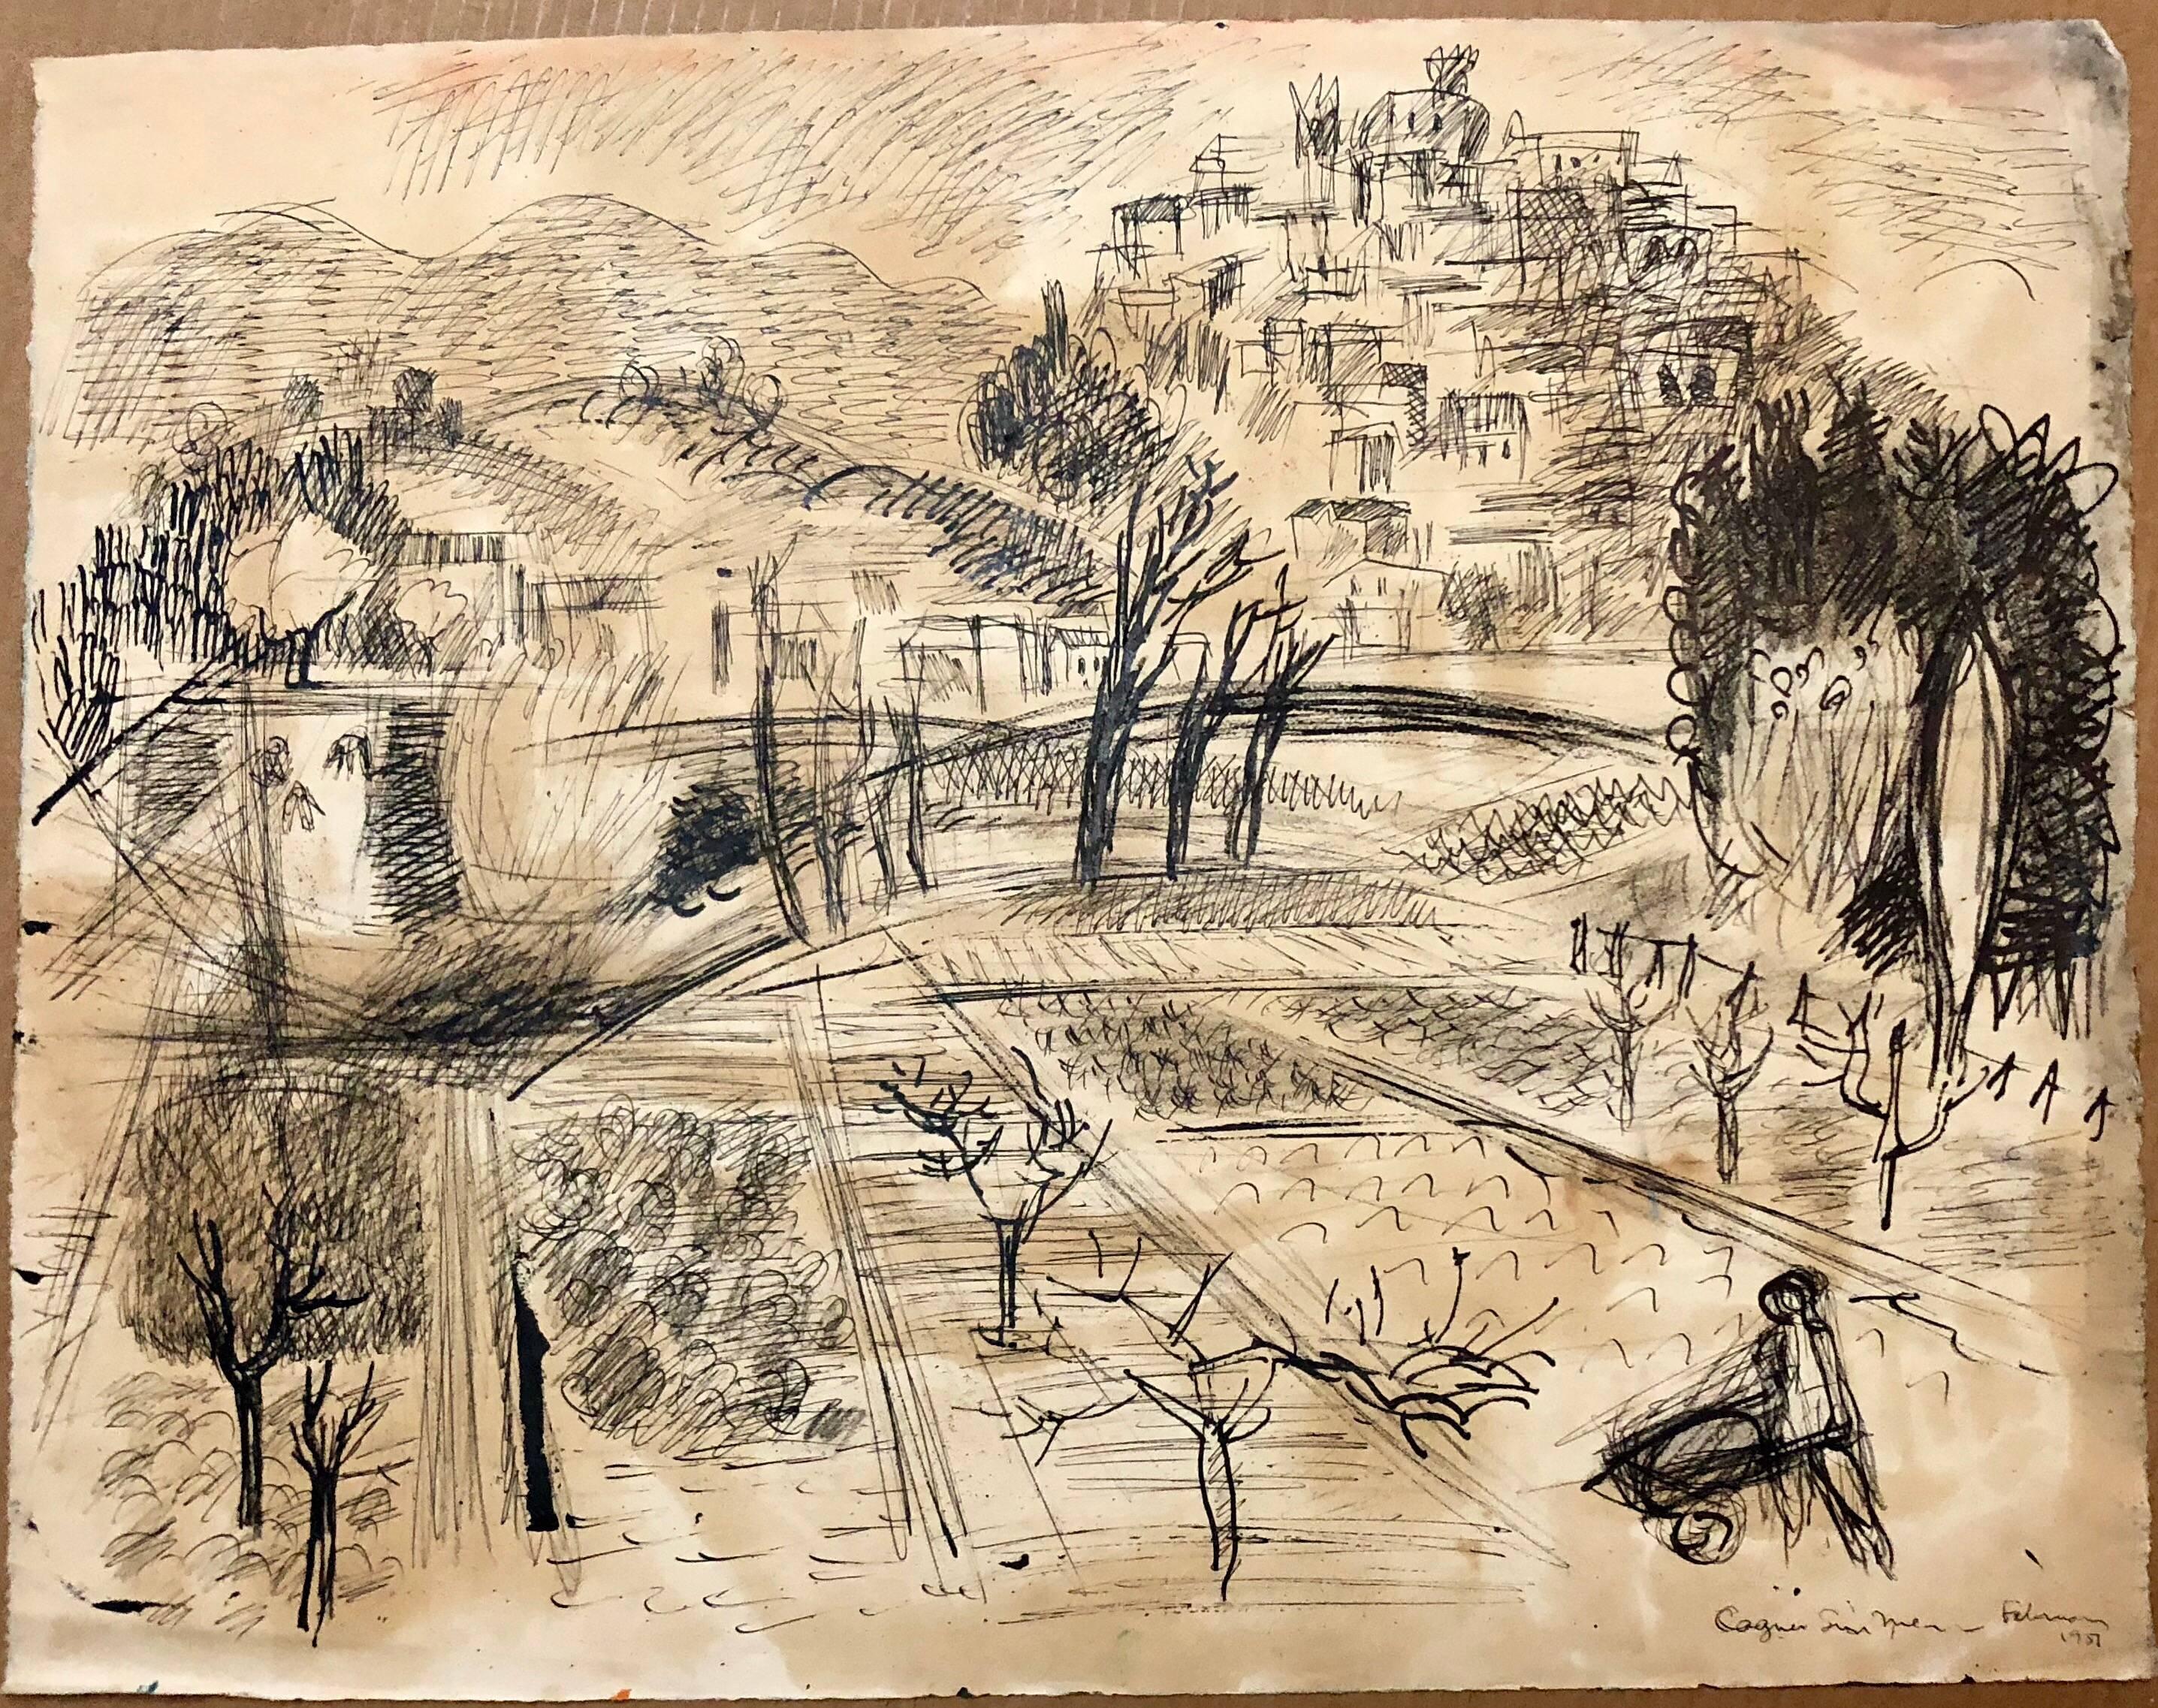 Oil on paper (possibly gouache) painting. unsigned. this is two sided with the back having a drawing titled Cagnes Sur Mer (France) and dated February 1957. 

Abbott Lawrence Pattison (May 15, 1916 – April 16, 1999) was an American sculptor and